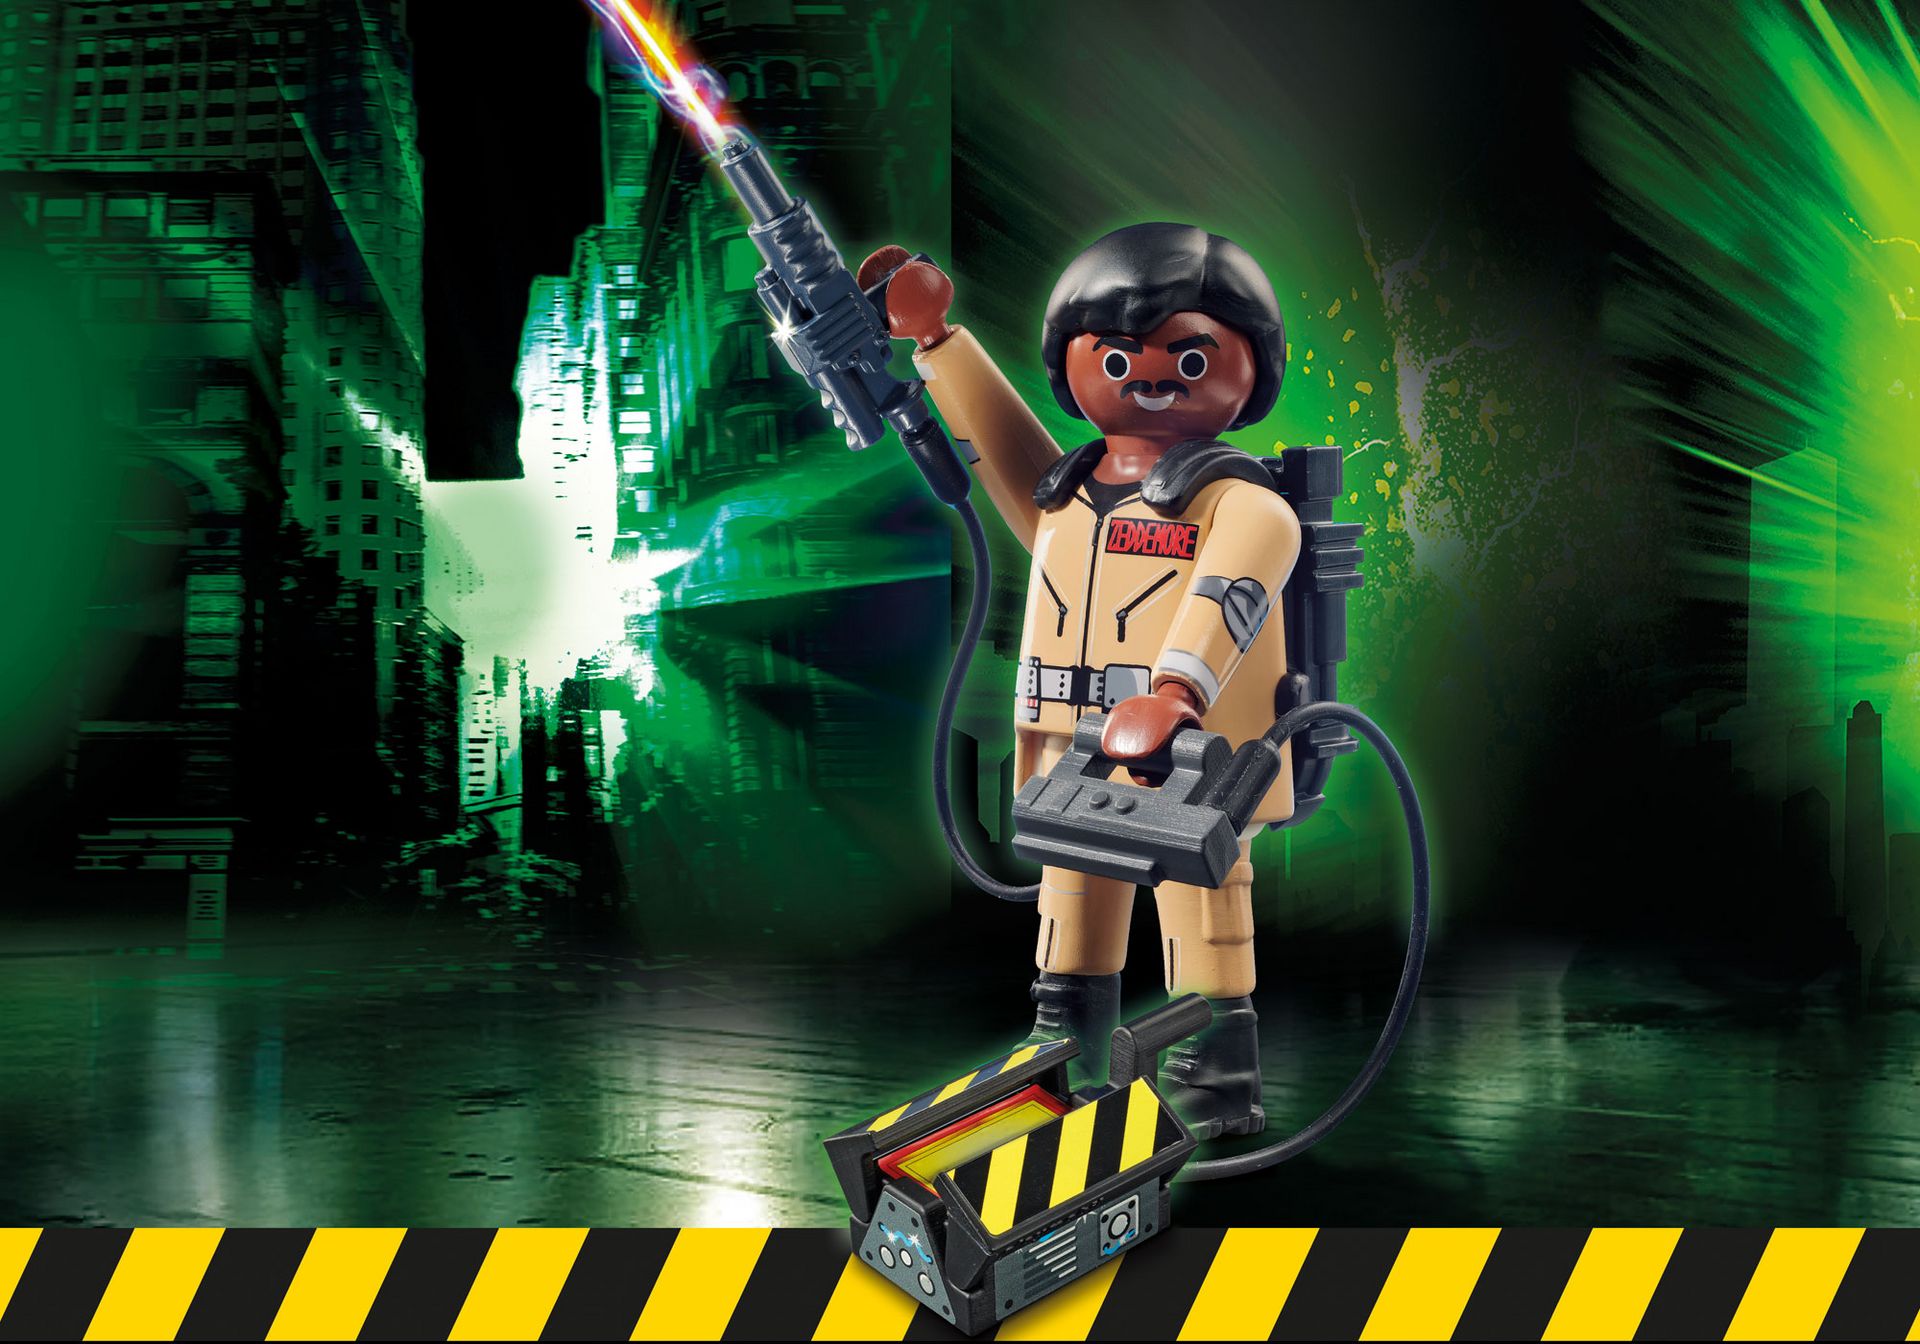 Zeddemore Playmobil Ghostbusters Edition Collector W 70171